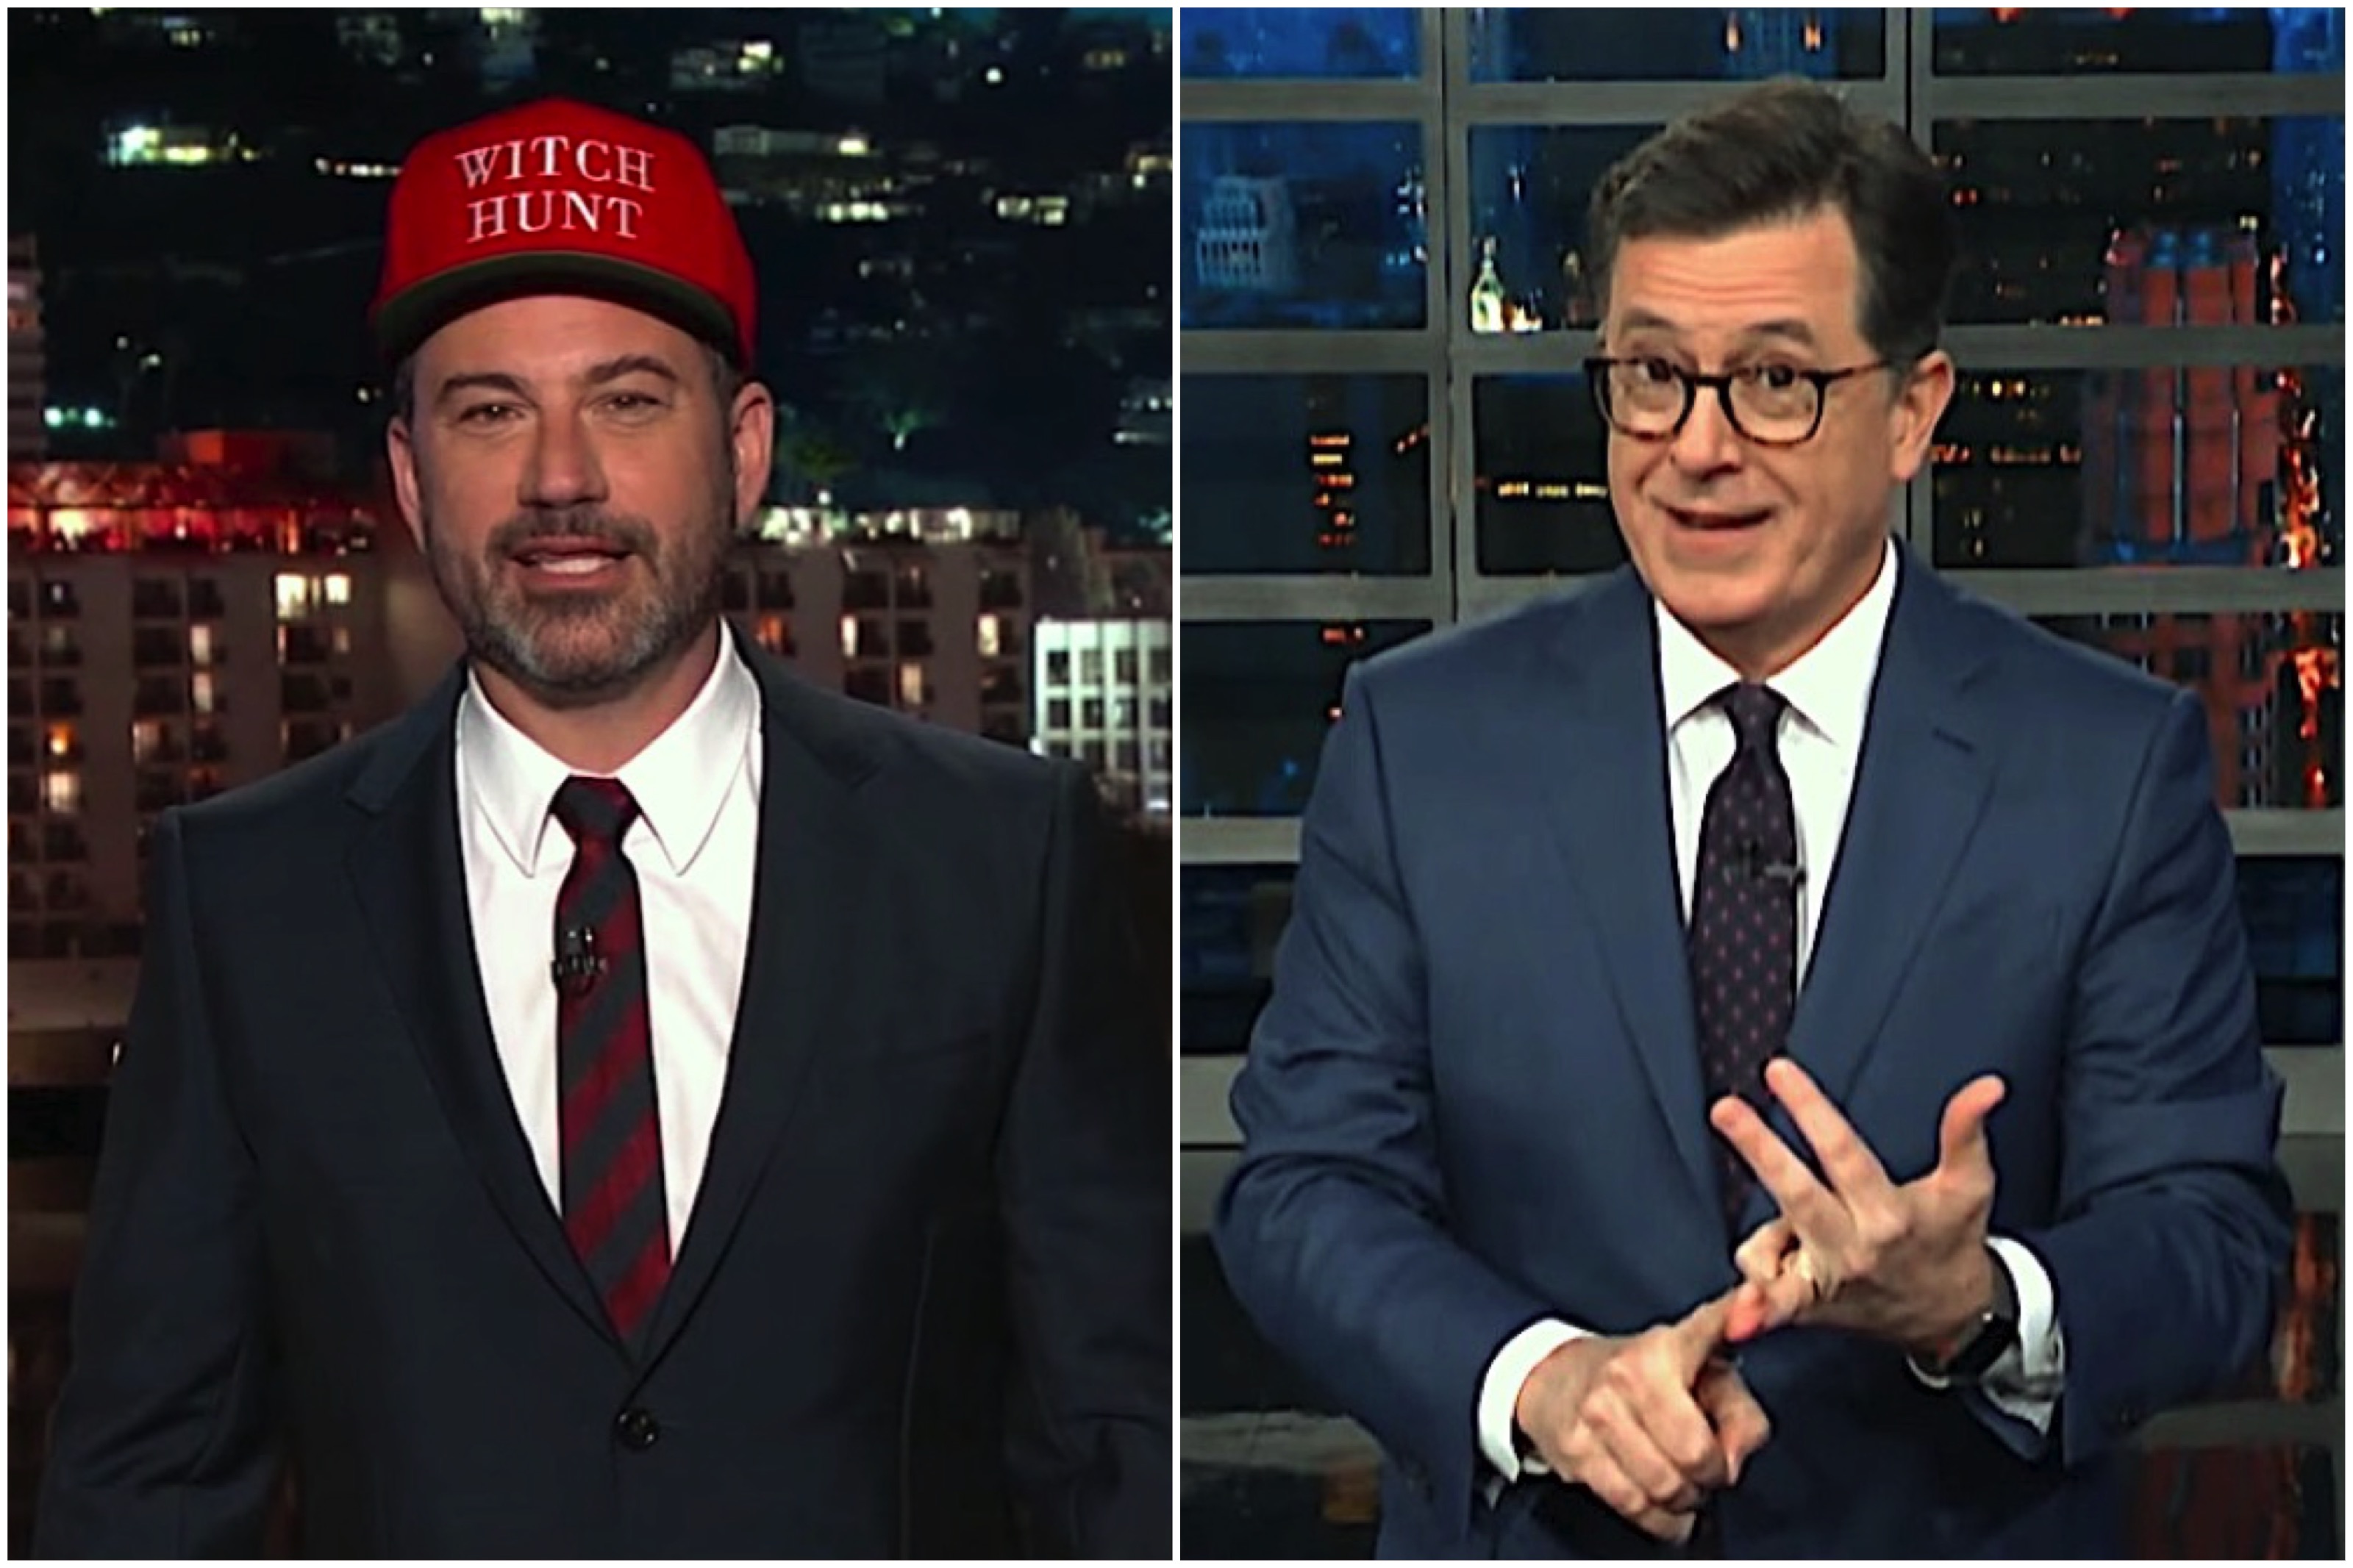 Stephen Colbert and Jimmy Kimmel mock &quot;Witch Hunt&quot;